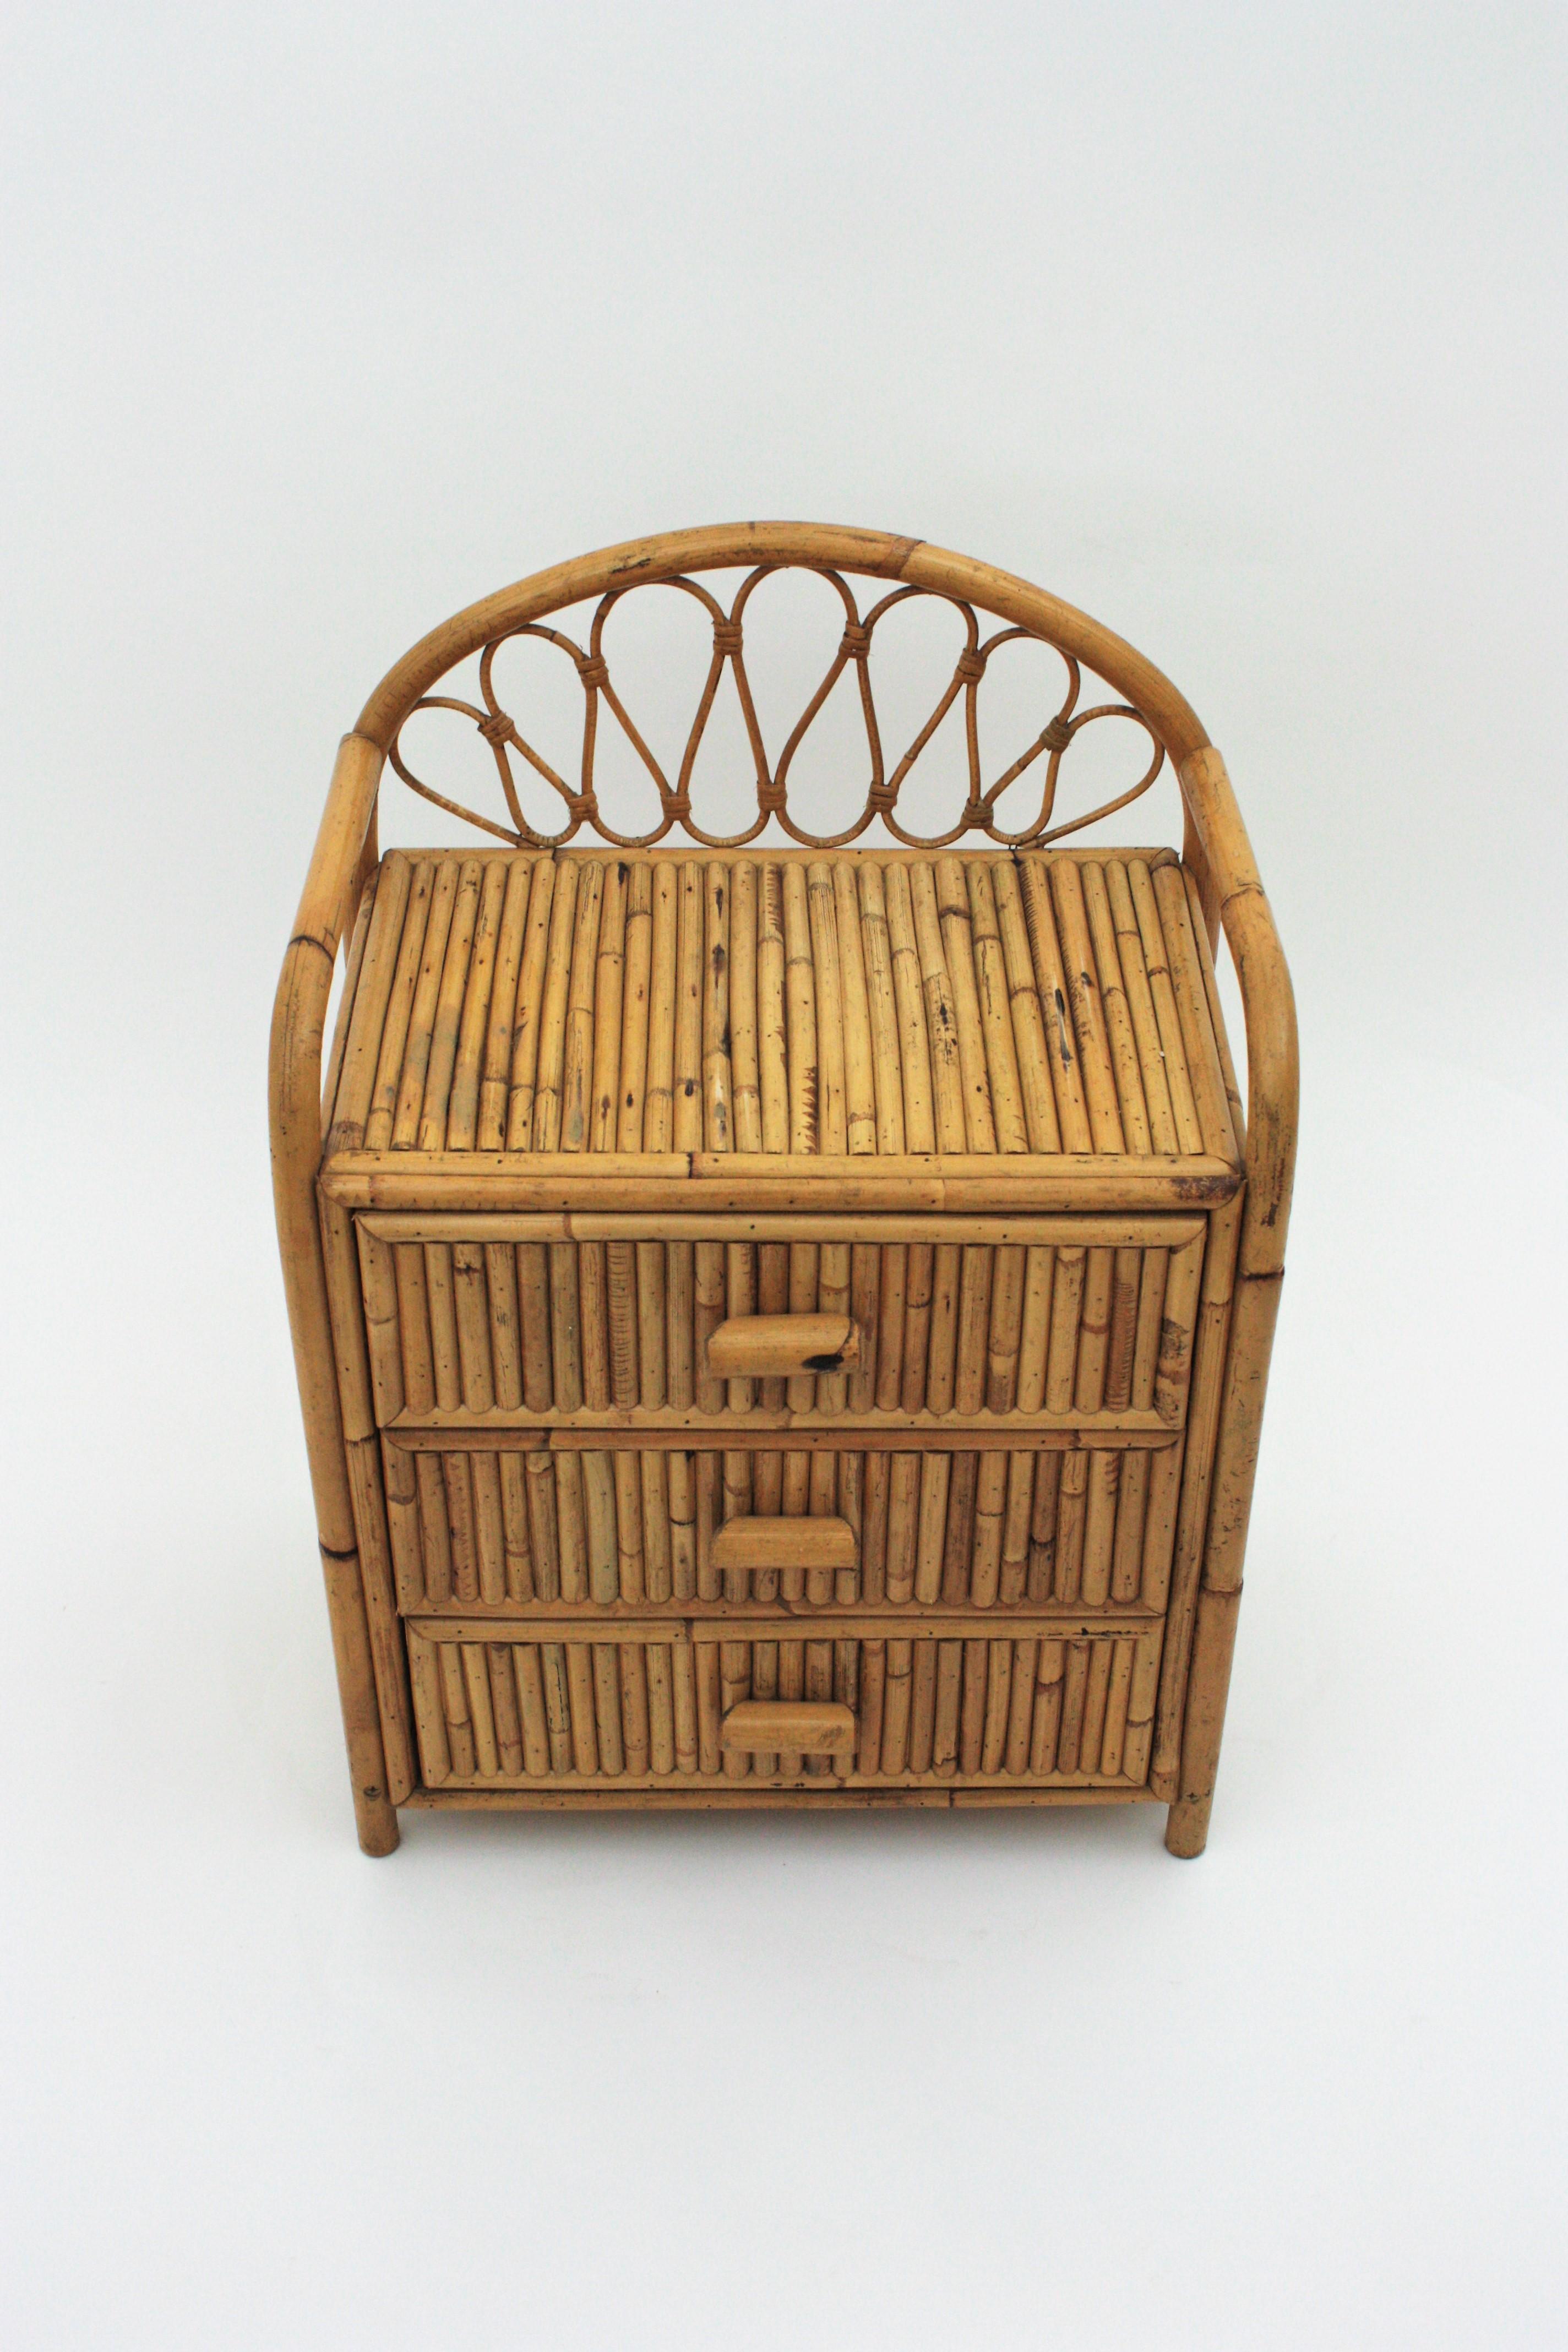 Split Reed Bamboo Rattan End Table or Nightstand, 1970s For Sale 1